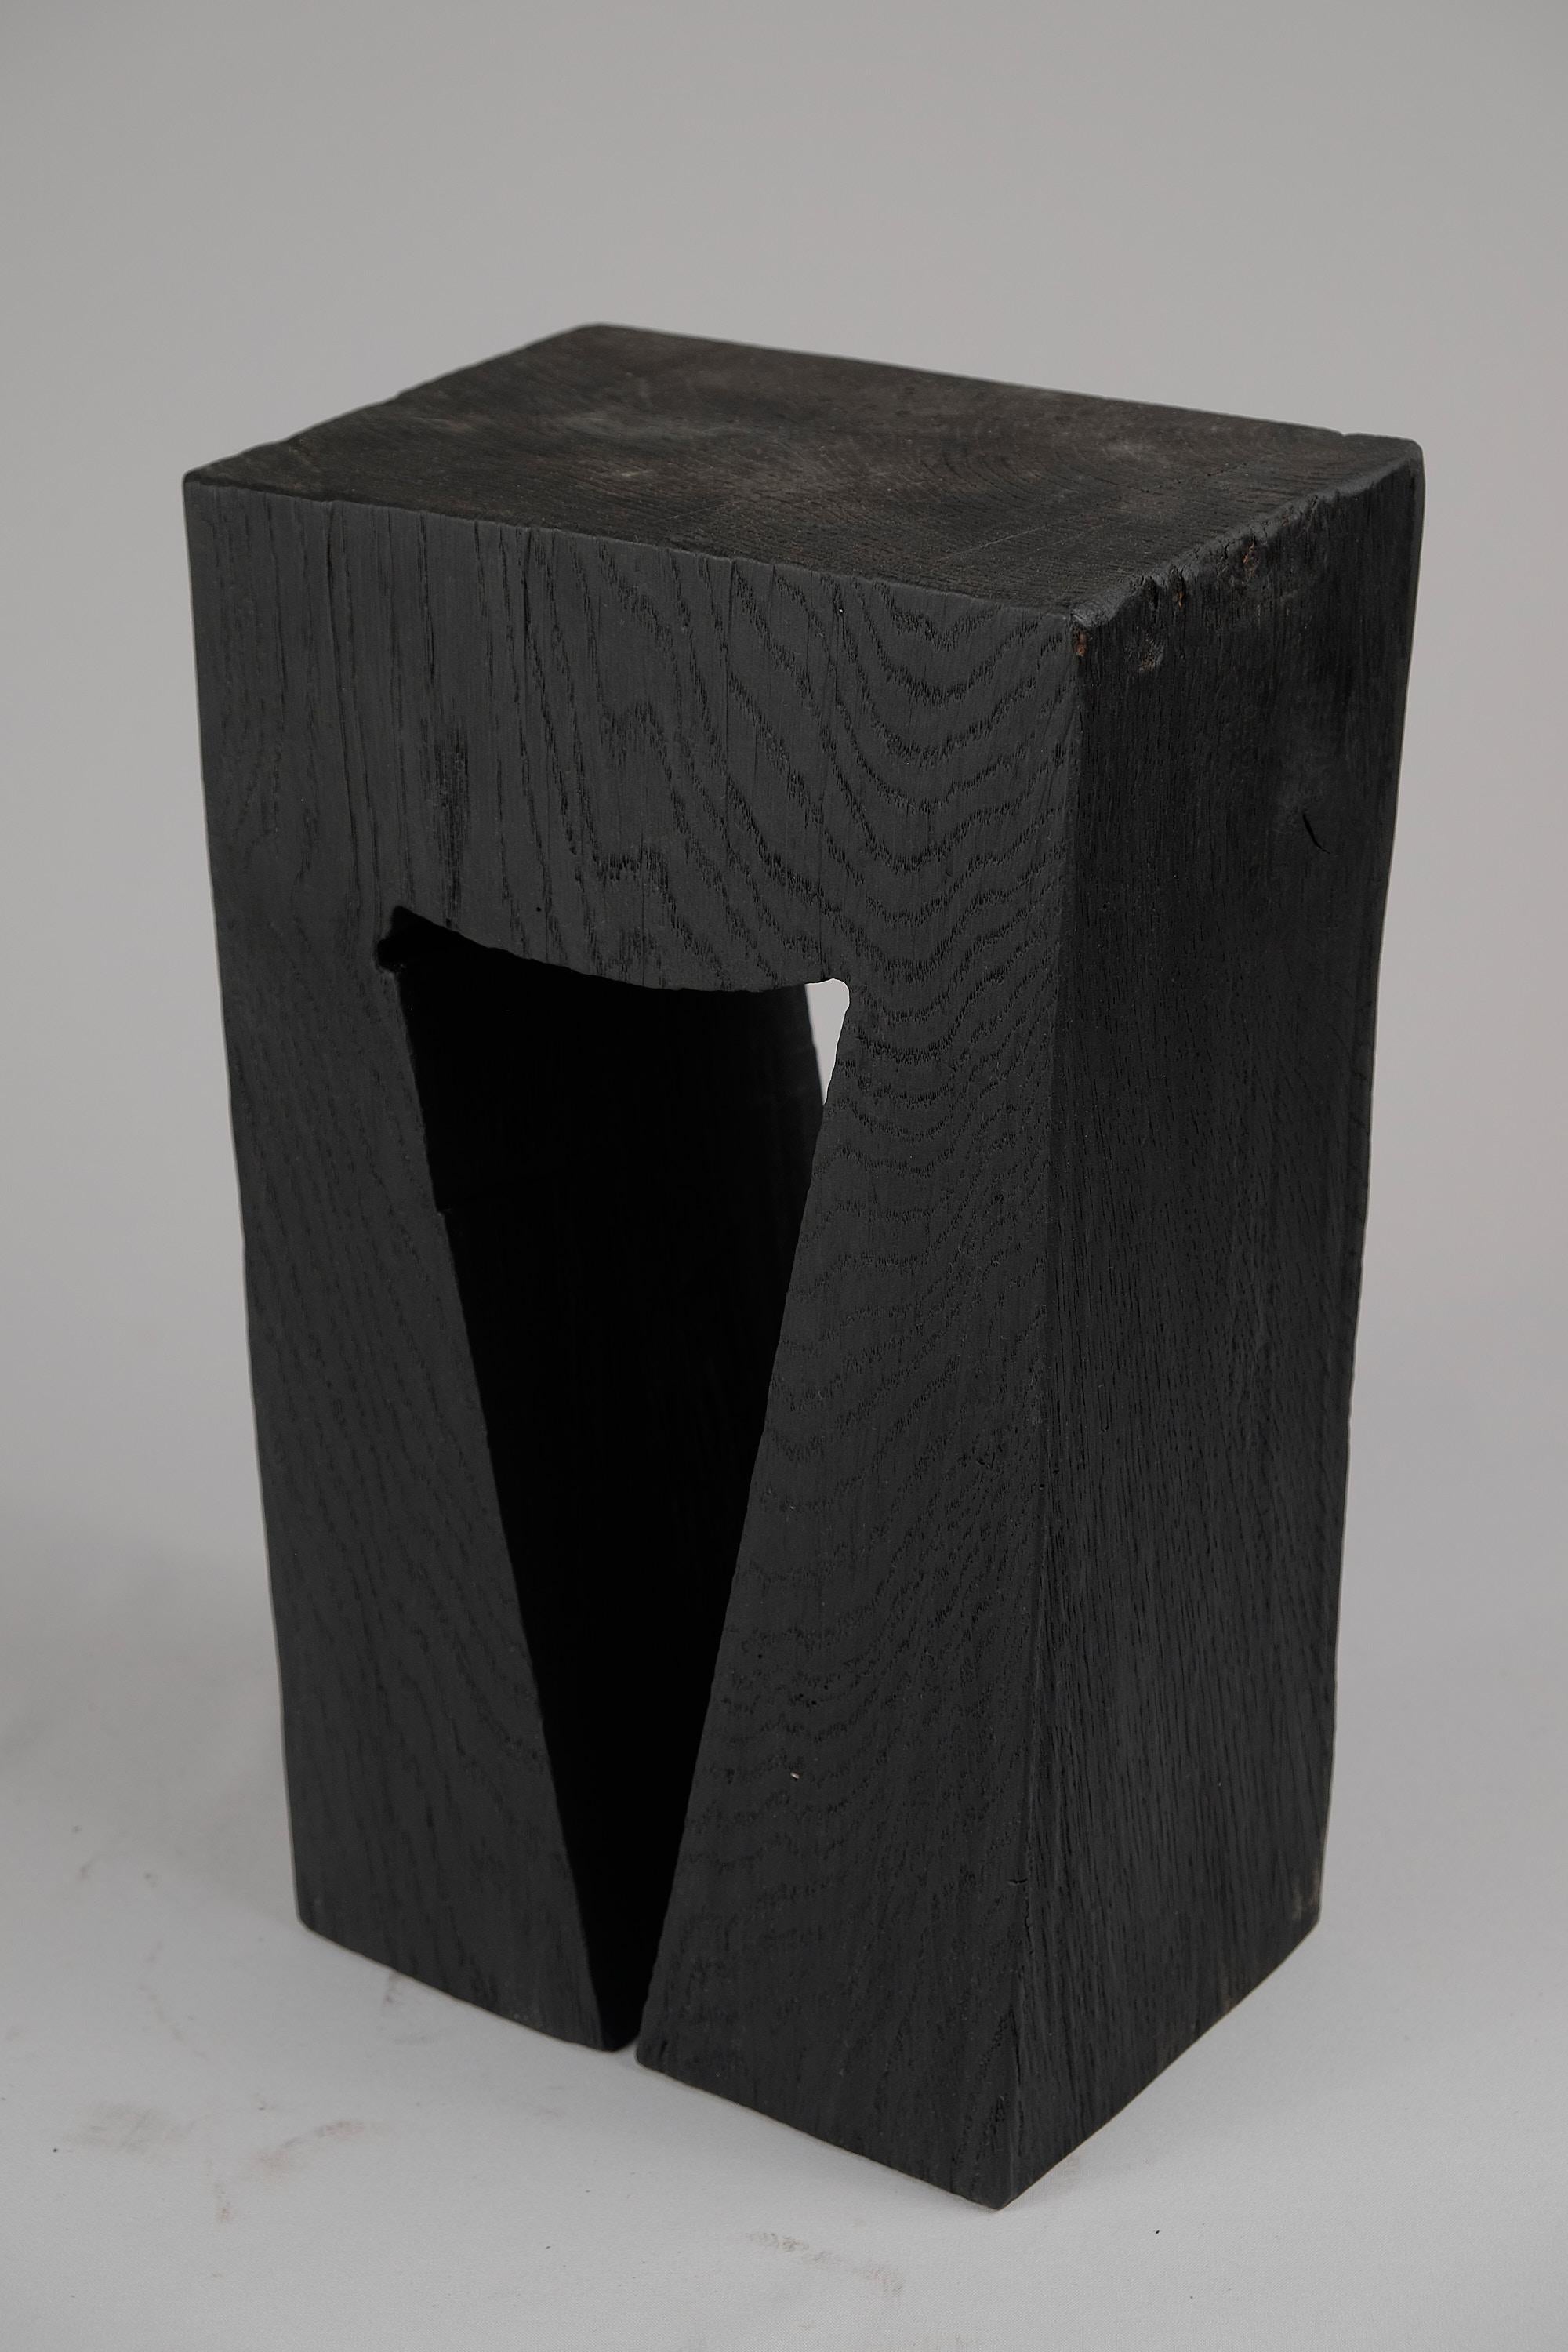 Solid Burnt Wood, Side Table, Stool, Original Contemporary Design, Logniture 2